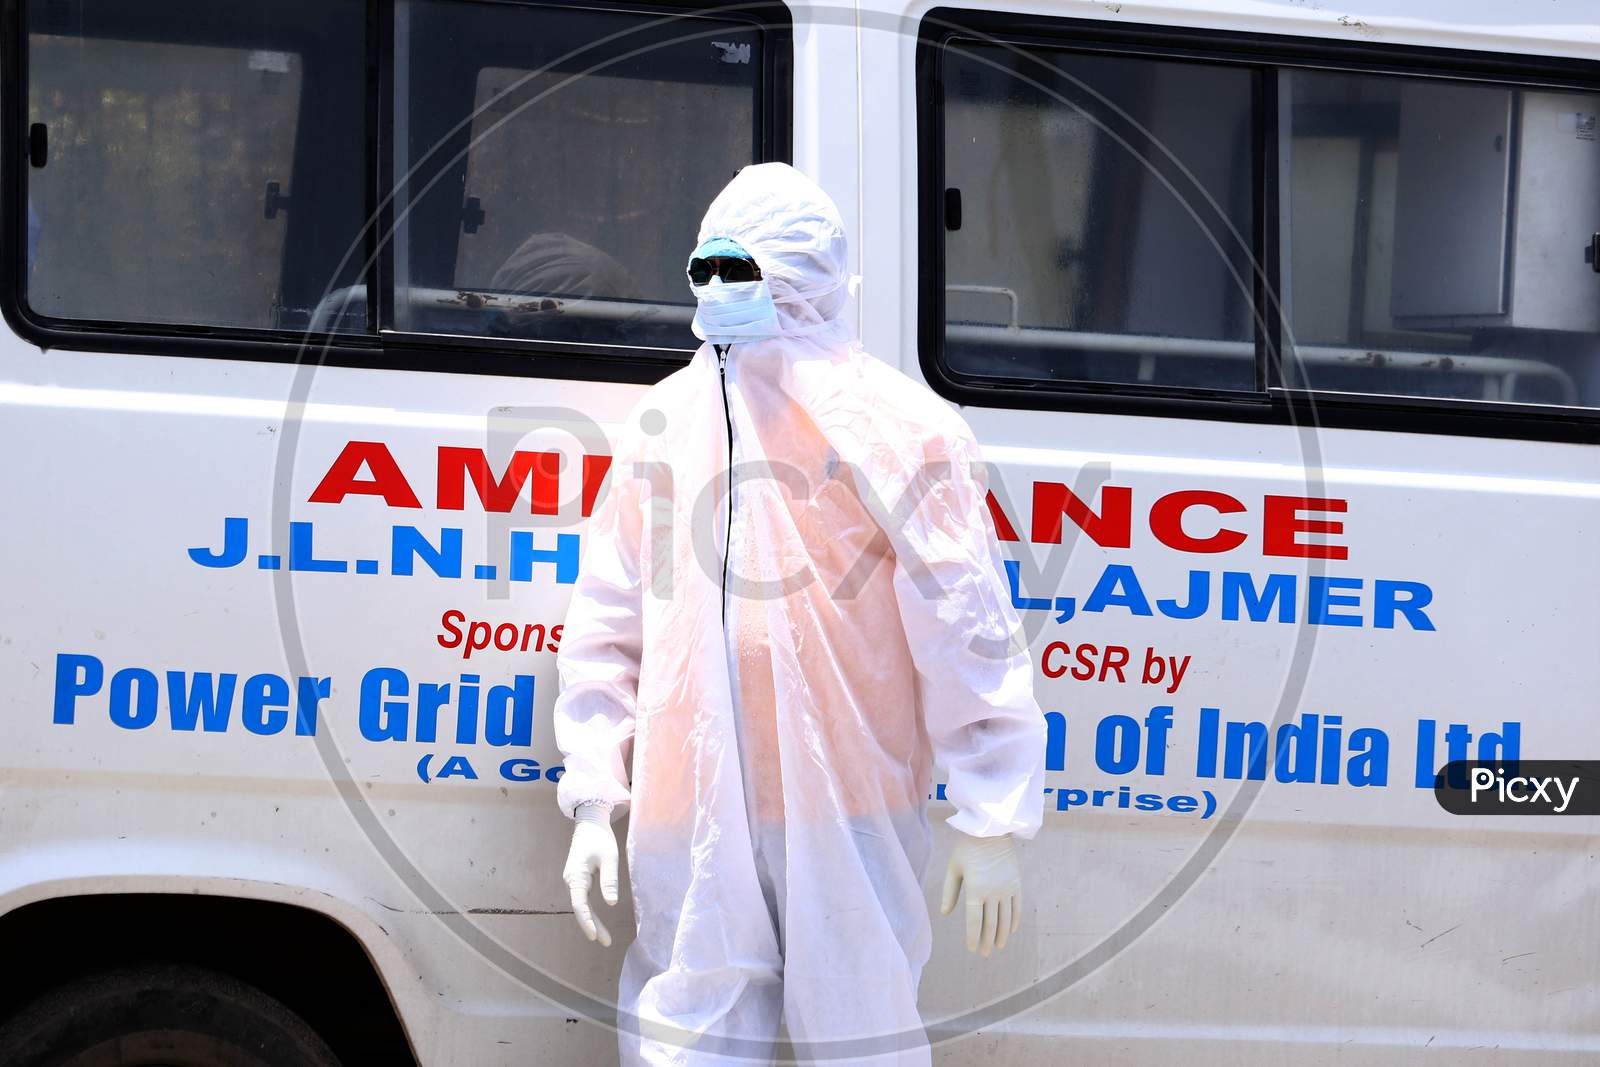 Health Workers Wear Personal Protective Equipment (Ppe) During Cremation Of a Woman Who Died Due To The Coronavirus Disease (Covid-19), At A Crematorium In Ajmer, Rajasthan, India On 08 June 2020.